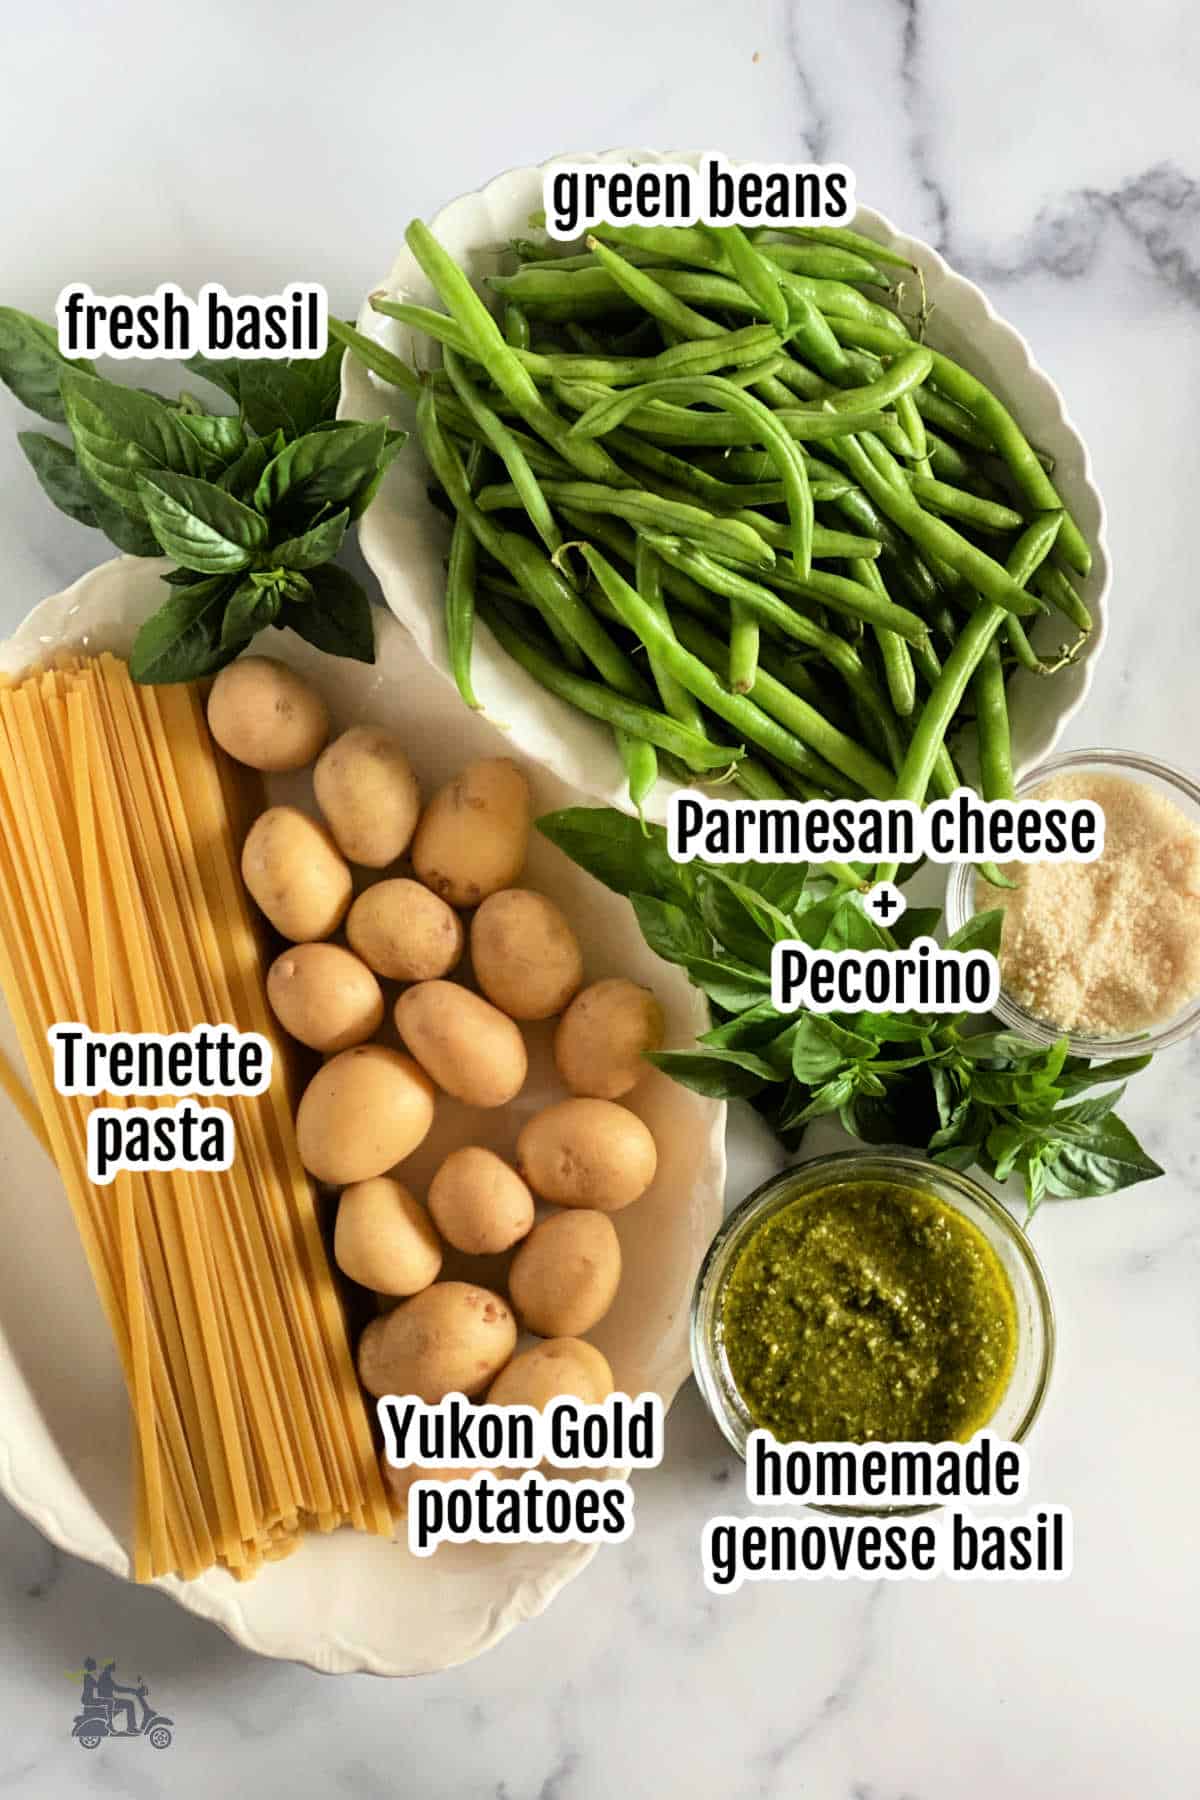 Image of the ingredients needed to make the Ligurian Trenette al pesto dish. 